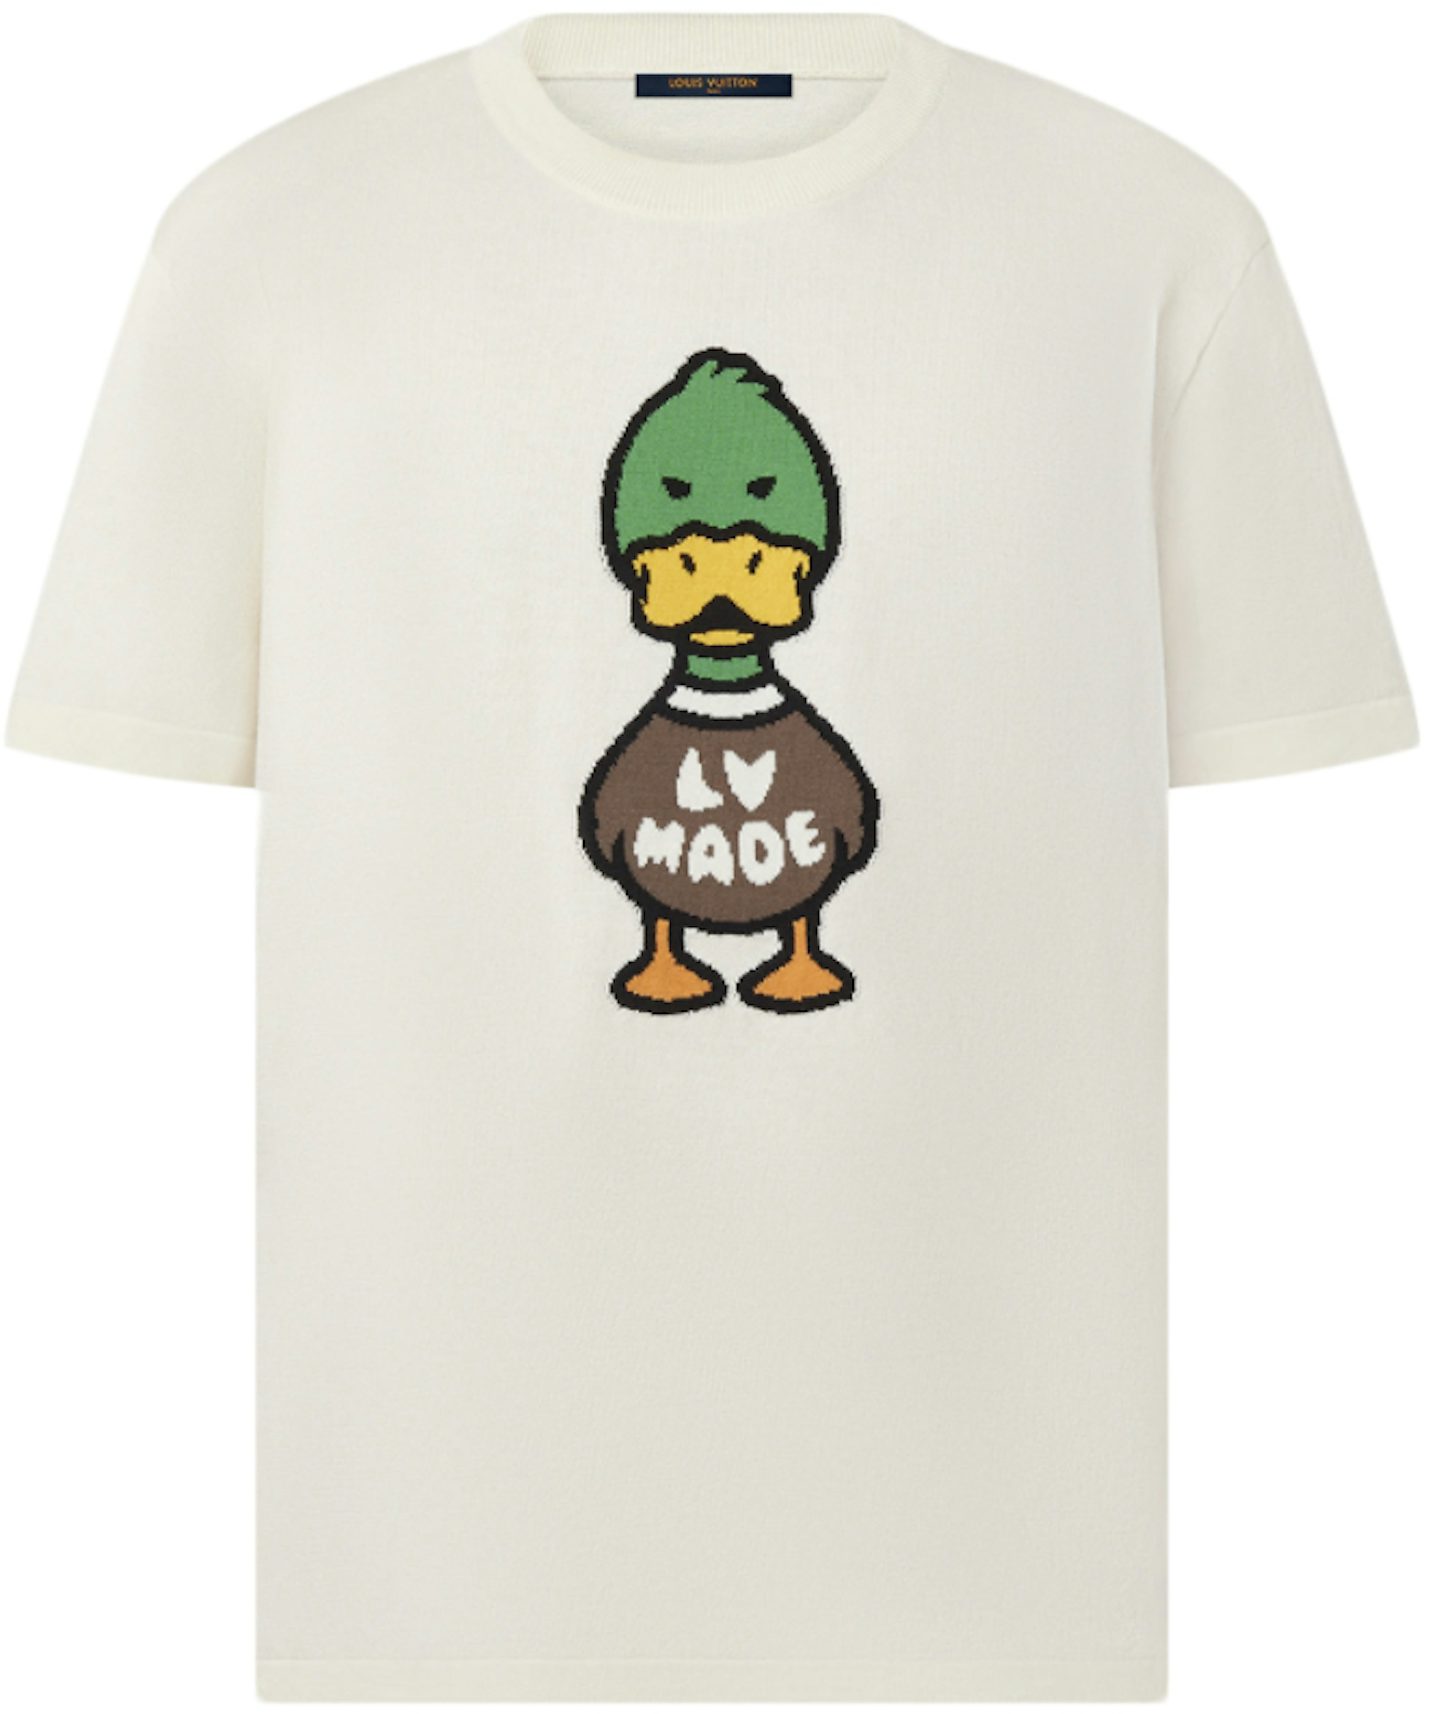 Nice lV Made Duck Louis Vuitton Shirt, hoodie, sweater, long sleeve and  tank top